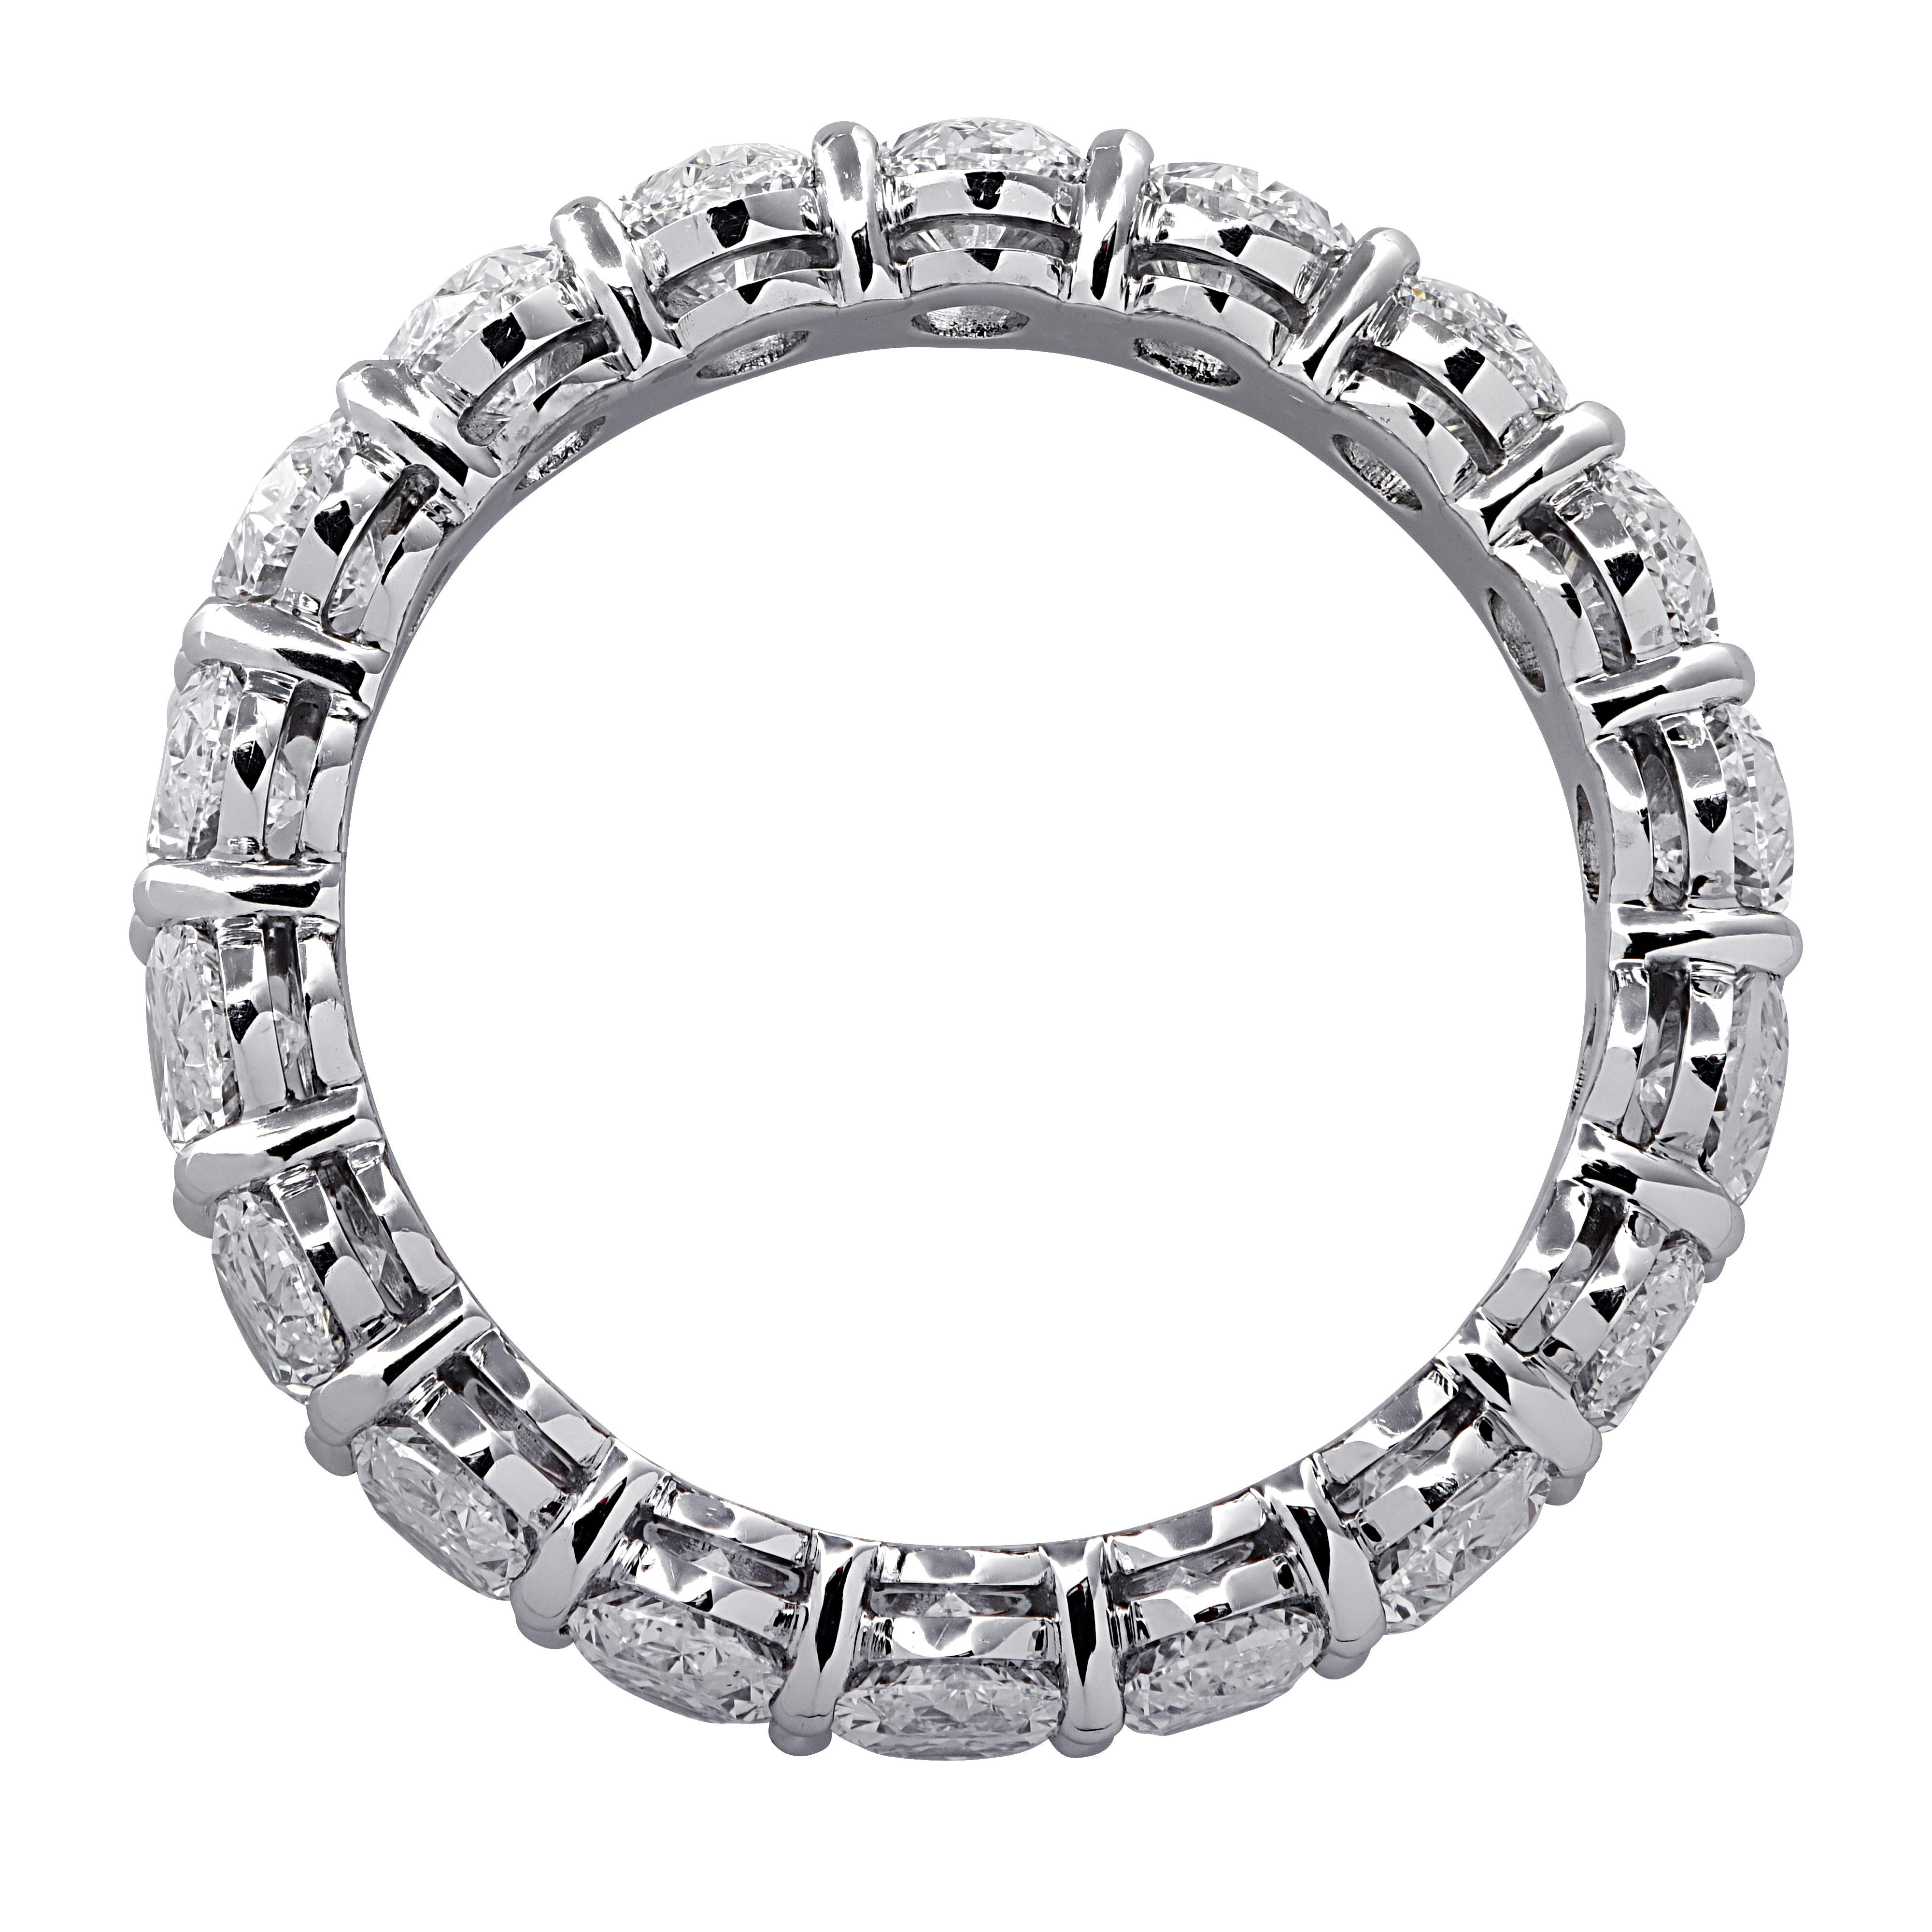 Exquisite Vivid Diamonds eternity band crafted in Platinum, showcasing 18 stunning oval cut diamonds weighing 3.66 carats total, F-G color, VVS-VS clarity. Each diamond is carefully selected, perfectly matched and set in a seamless sea of eternity,